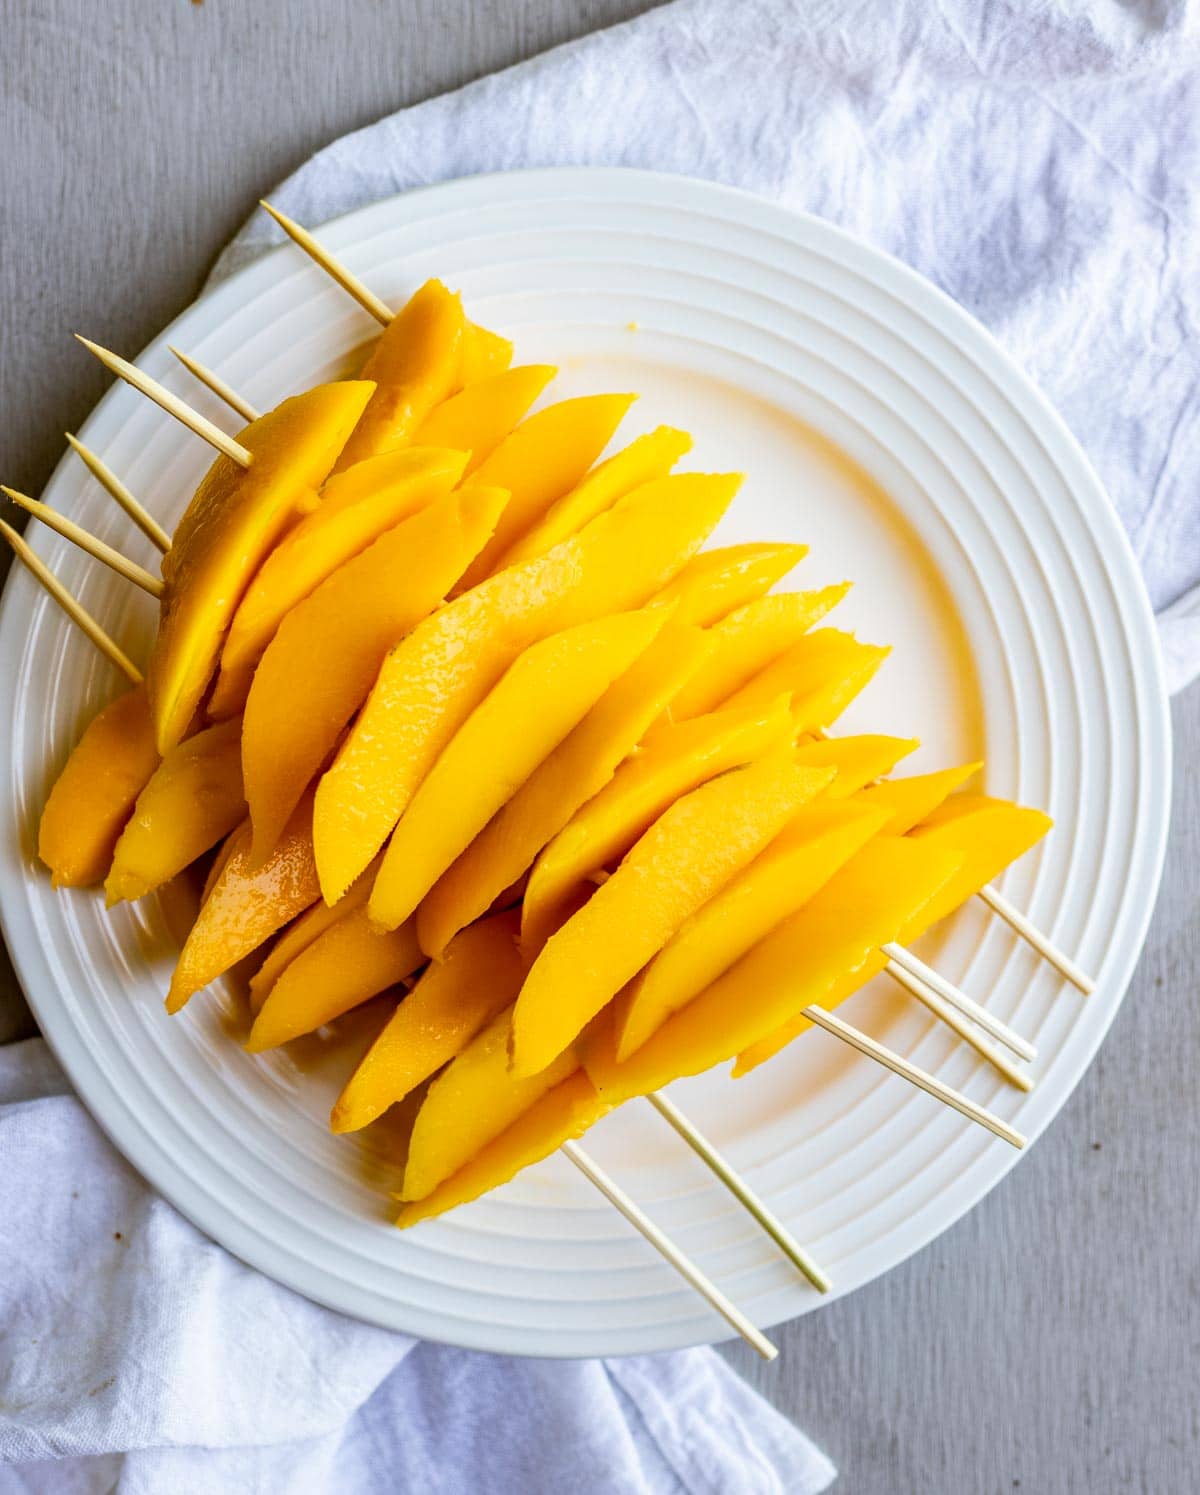 Sliced mangoes on skewers and piled on a white plate.